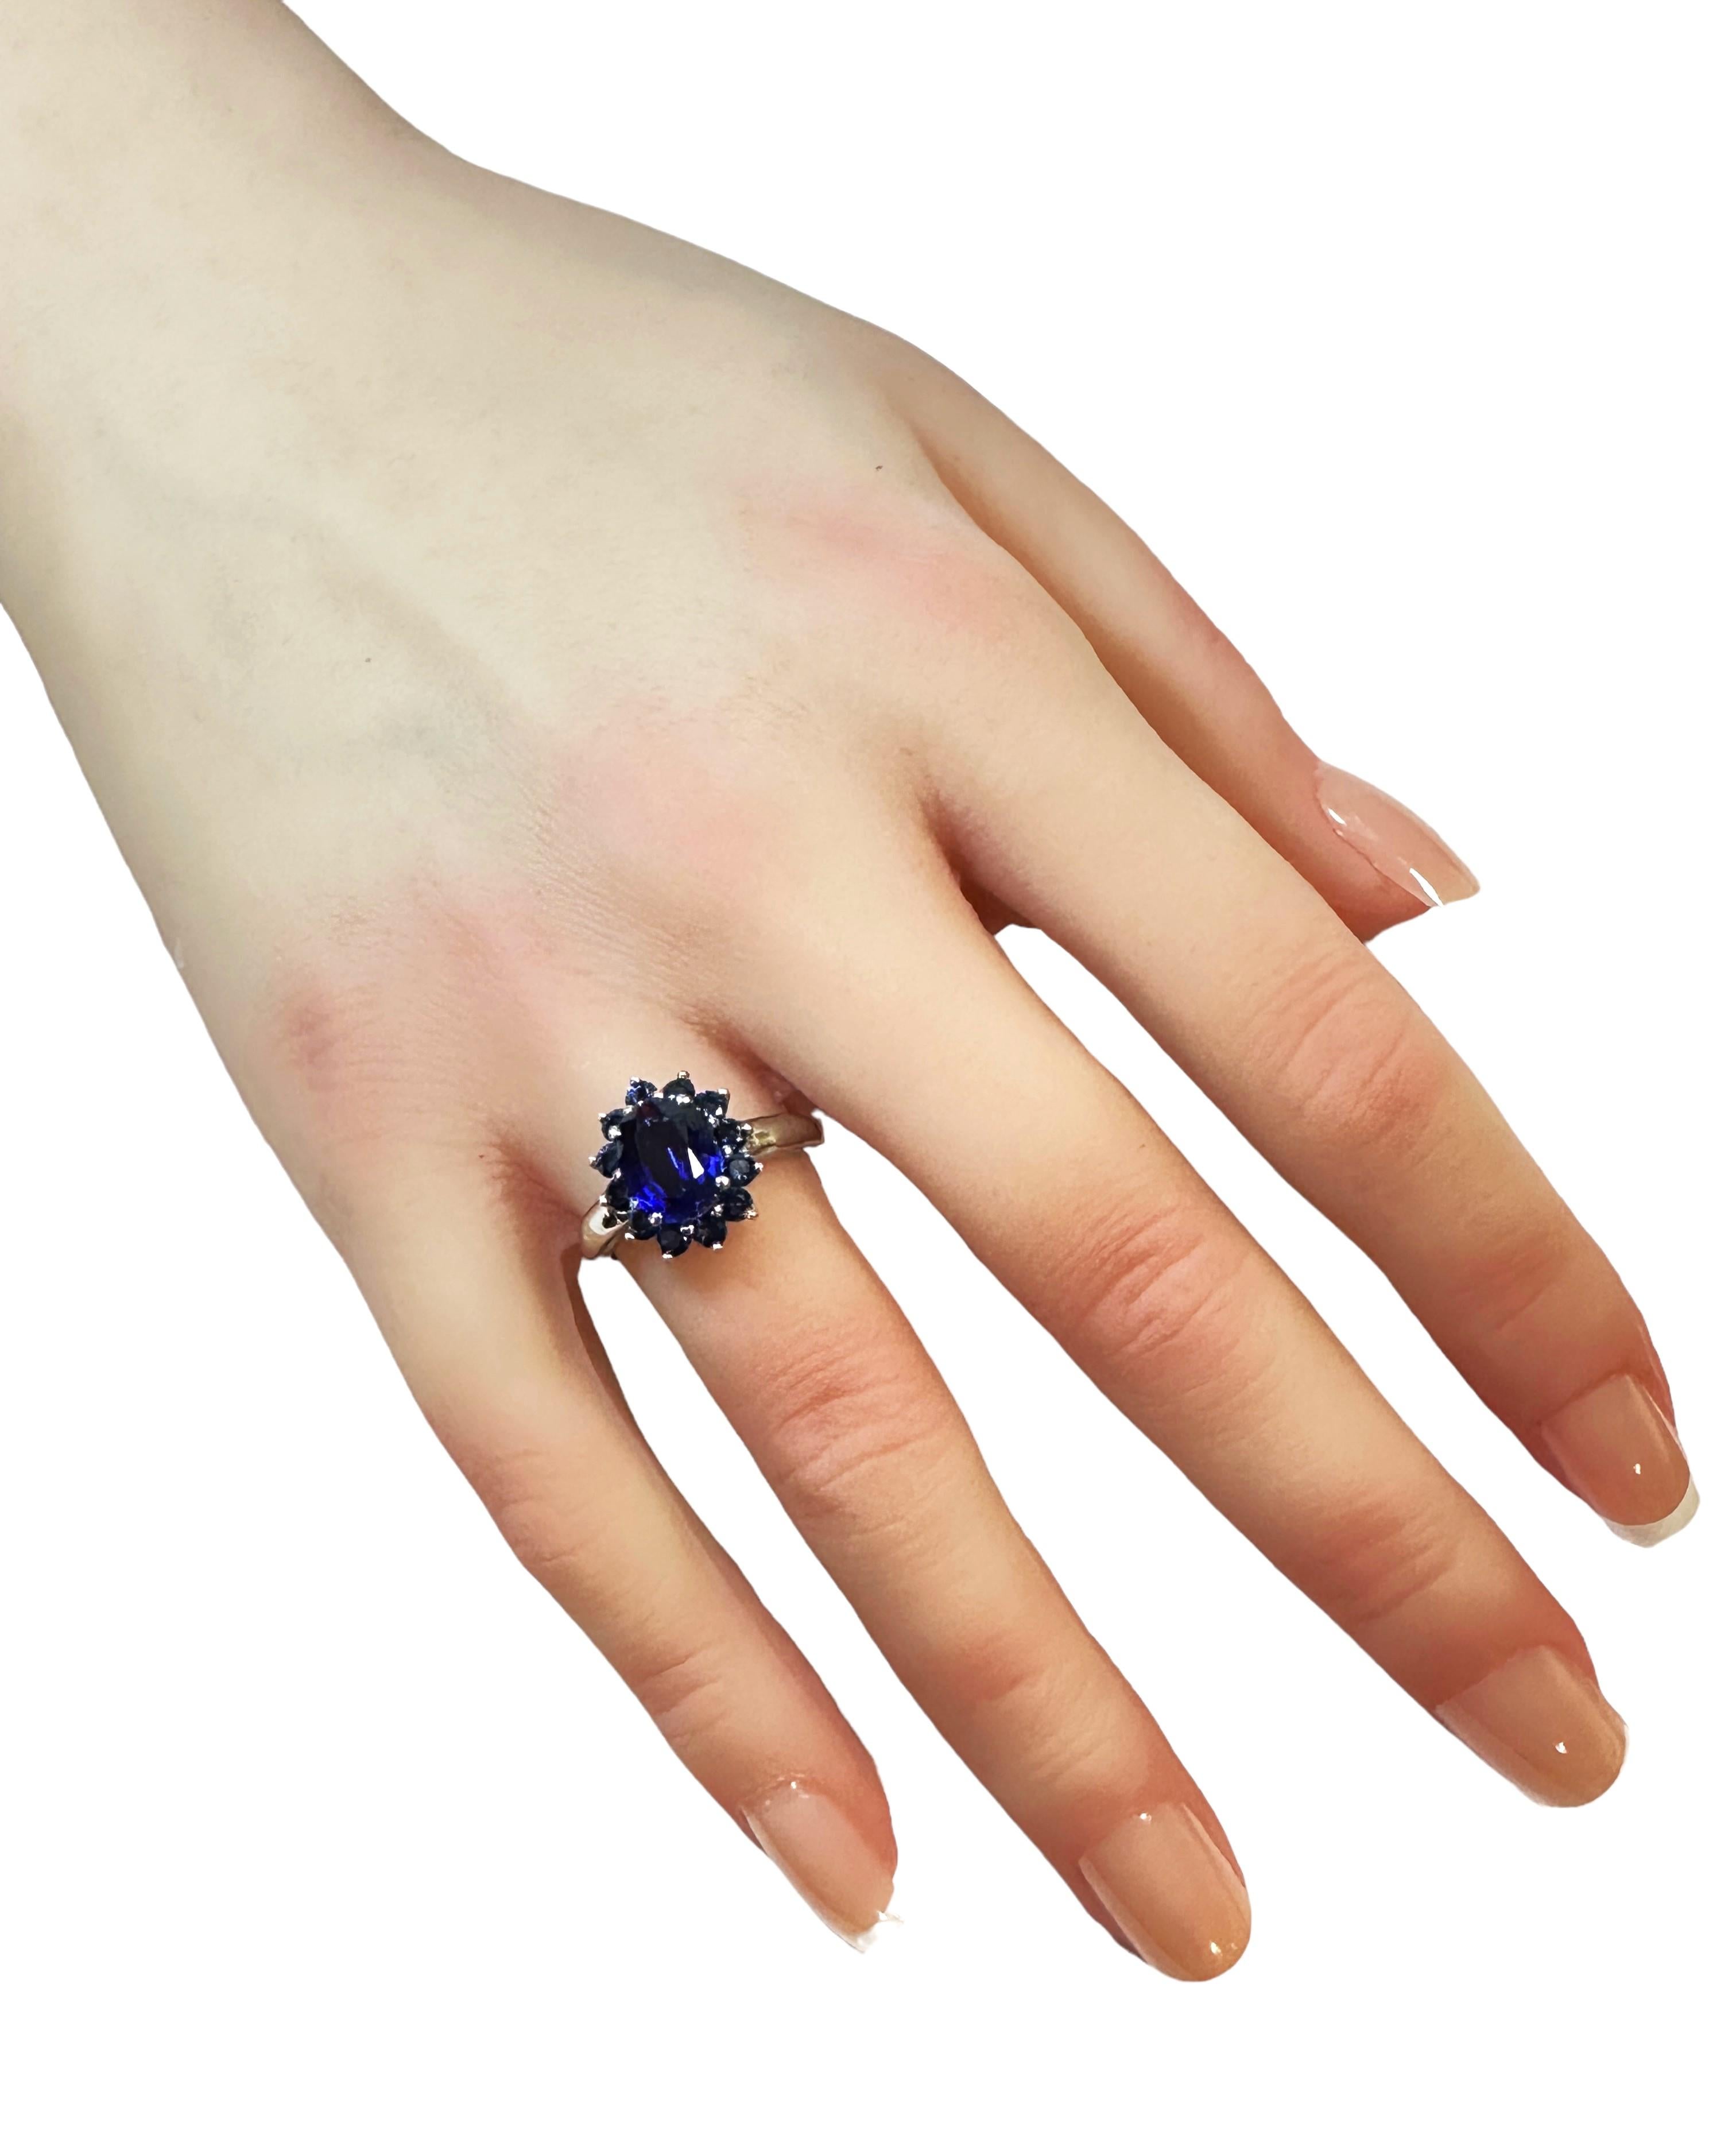 New African 3.20 Ct Deep Blue Sapphire Sterling Ring Size 6.25 For Sale 1